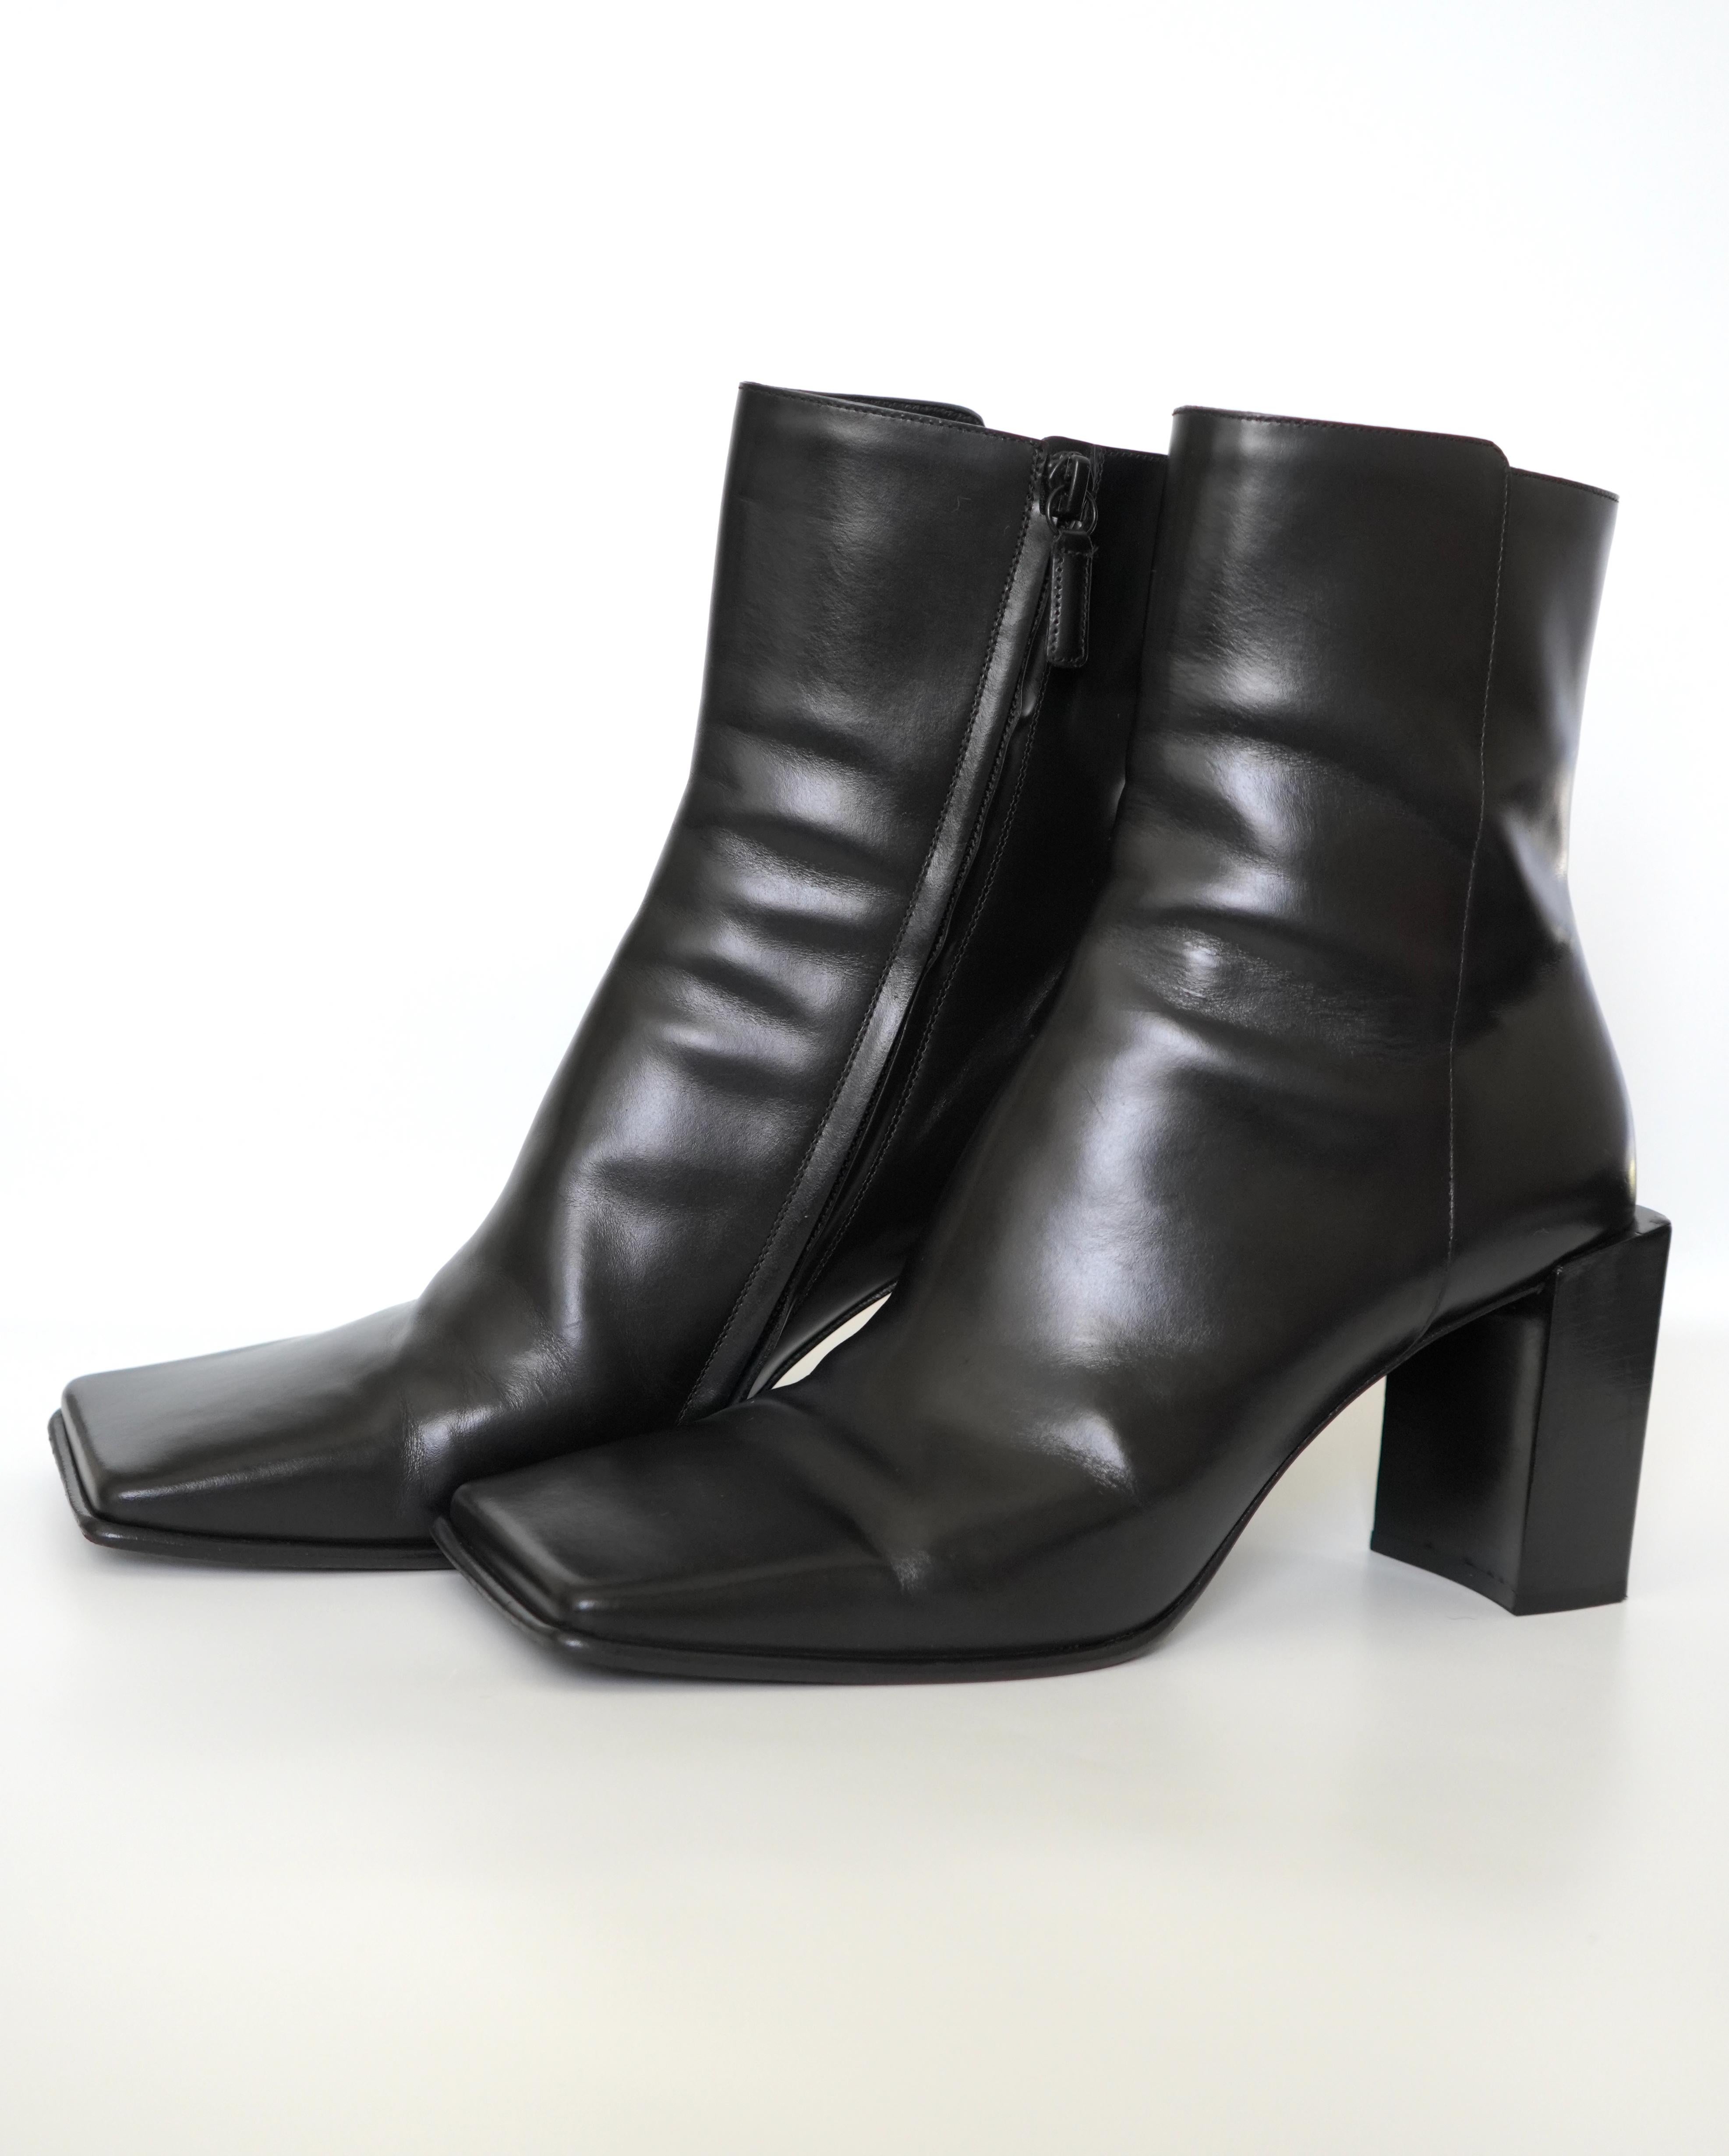 Balenciaga Moon Square Toe Leather Boots 
Size EU 40
Heel height: 3 inches
Size 40
Inside zipper
Square toe
Block Heel
Some wear, but in great condition